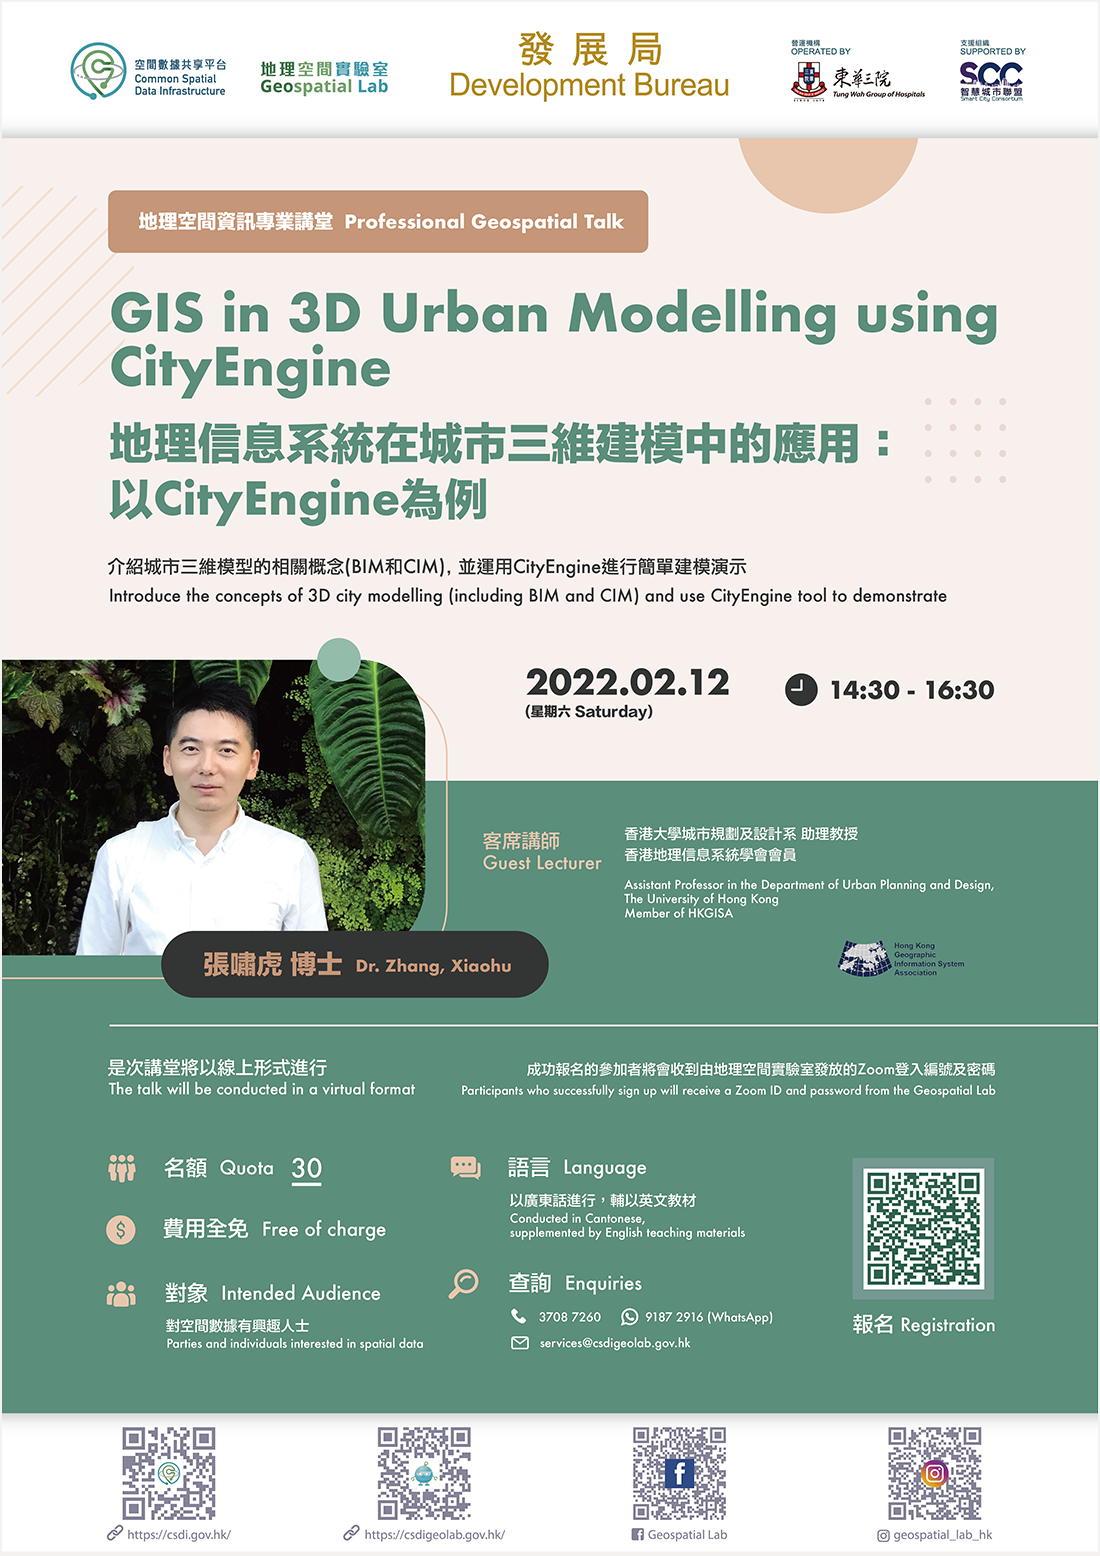 Poster of Professional Geospatial Talk - GIS in 3D Urban Modelling using CityEngine